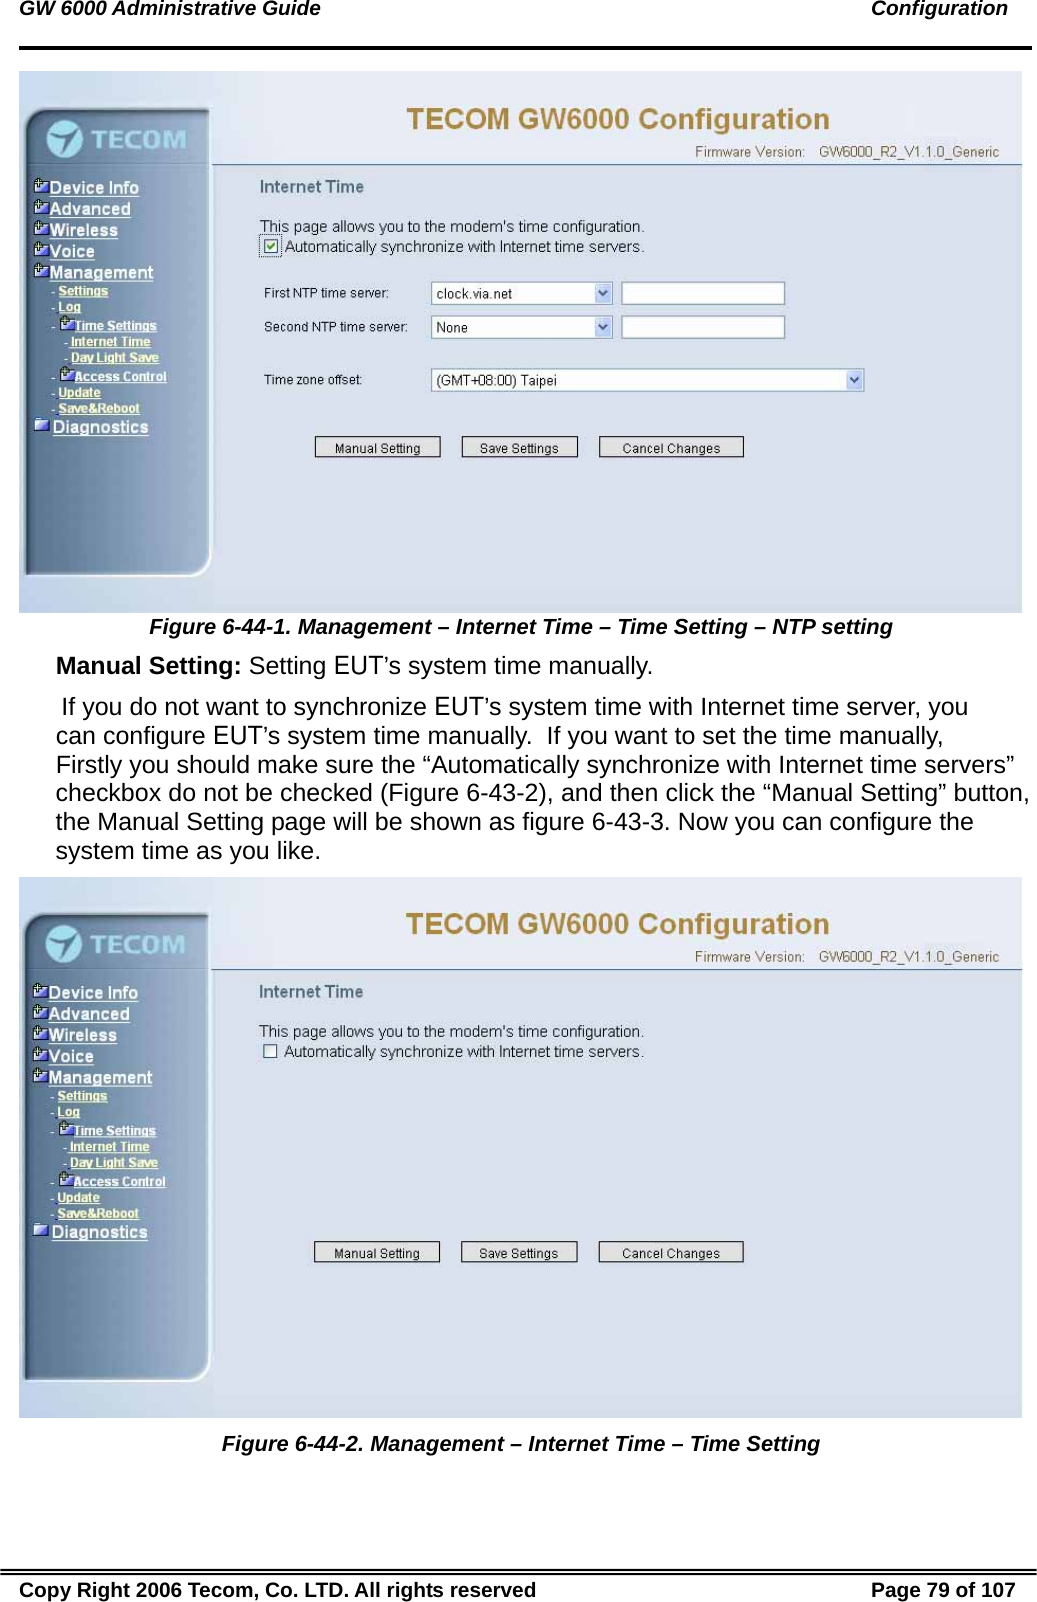 GW 6000 Administrative Guide                                                                                               Configuration  Figure 6-44-1. Management – Internet Time – Time Setting – NTP setting  Manual Setting: Setting EUT’s system time manually.  If you do not want to synchronize EUT’s system time with Internet time server, you can configure EUT’s system time manually.  If you want to set the time manually, Firstly you should make sure the “Automatically synchronize with Internet time servers” checkbox do not be checked (Figure 6-43-2), and then click the “Manual Setting” button, the Manual Setting page will be shown as figure 6-43-3. Now you can configure the system time as you like.   Figure 6-44-2. Management – Internet Time – Time Setting Copy Right 2006 Tecom, Co. LTD. All rights reserved  Page 79 of 107 